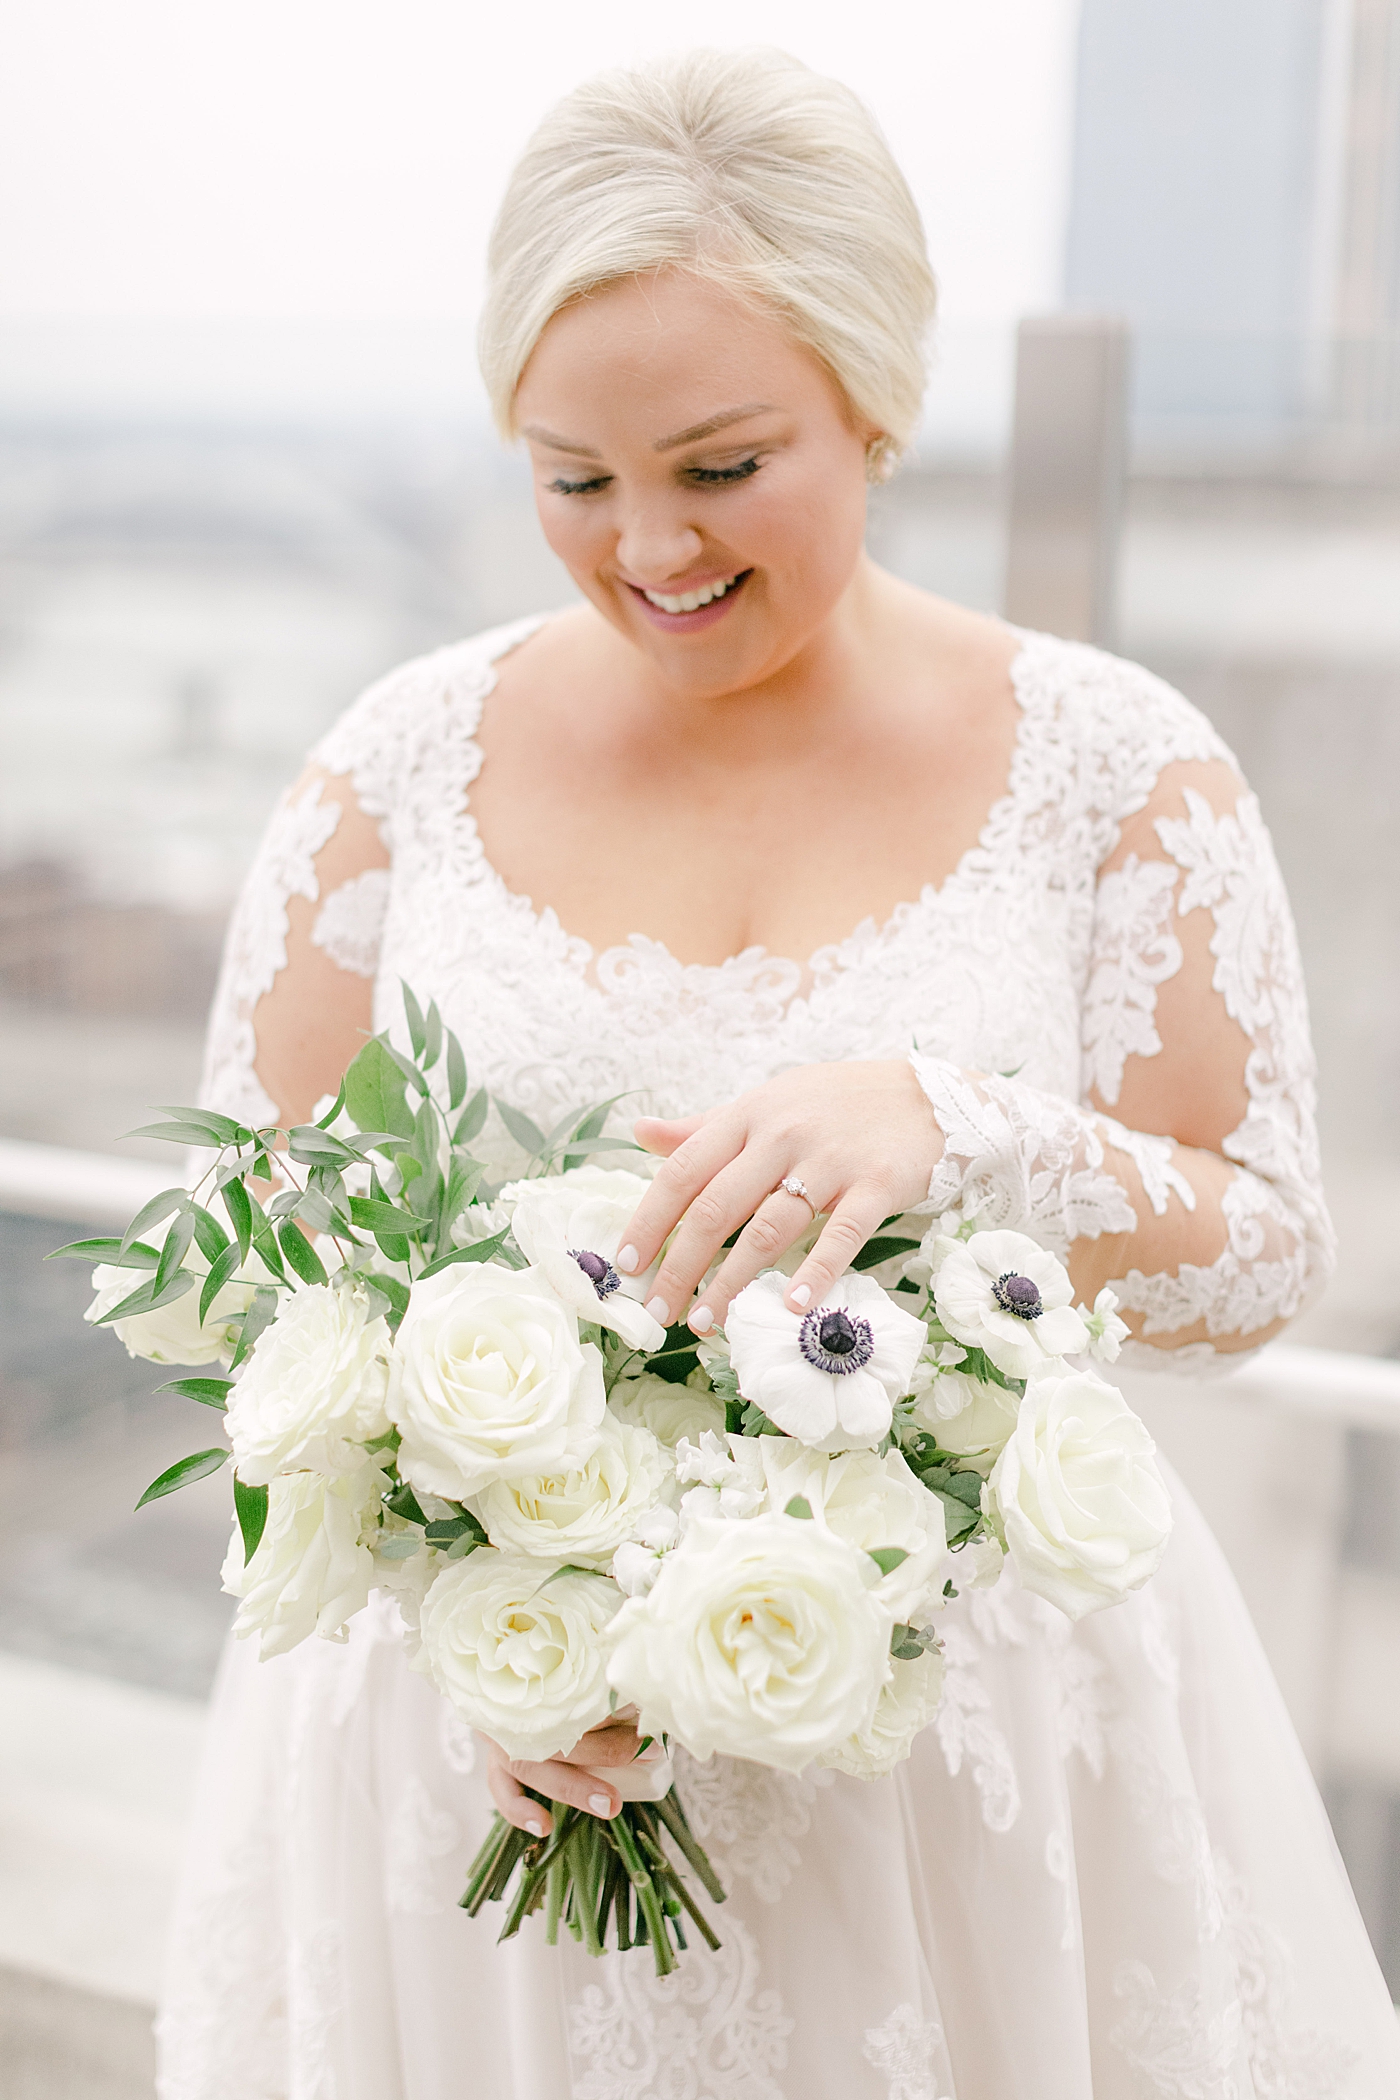 Bride with her bouquet during Noelle, Nashville Wedding | Photo by Hope Helmuth Photography